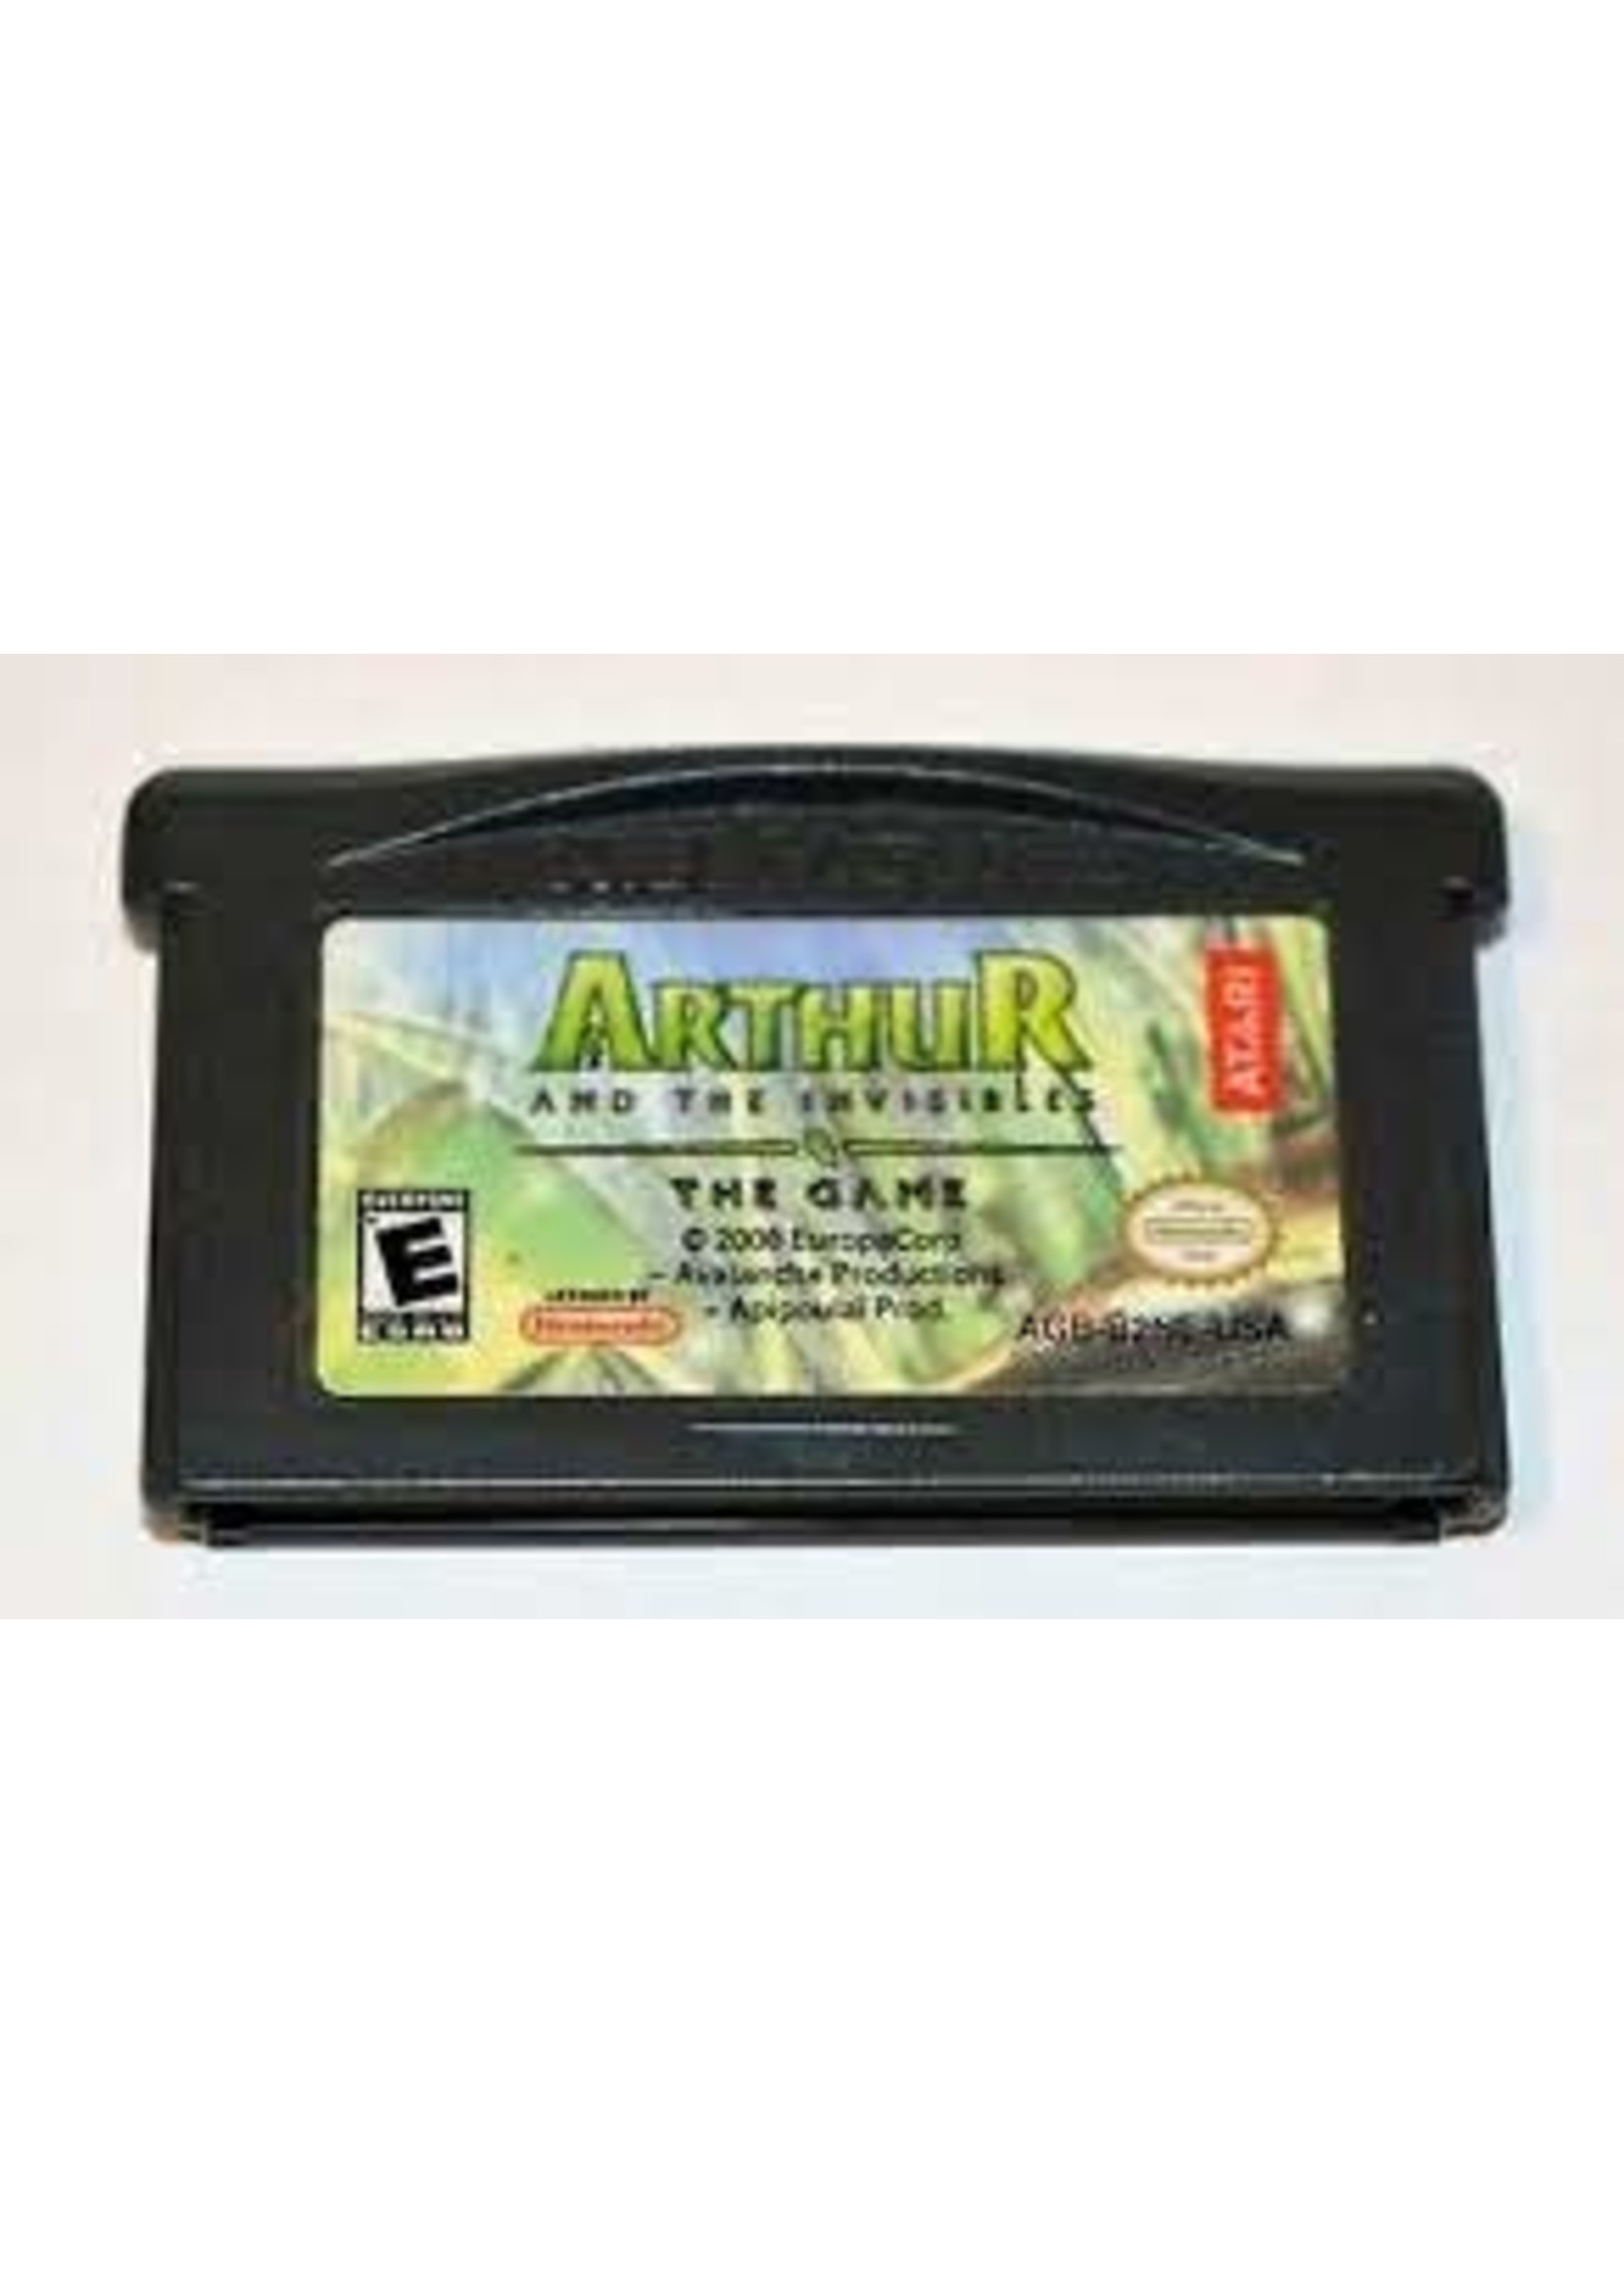 Nintendo Gameboy Advance Arthur and the Invisibles